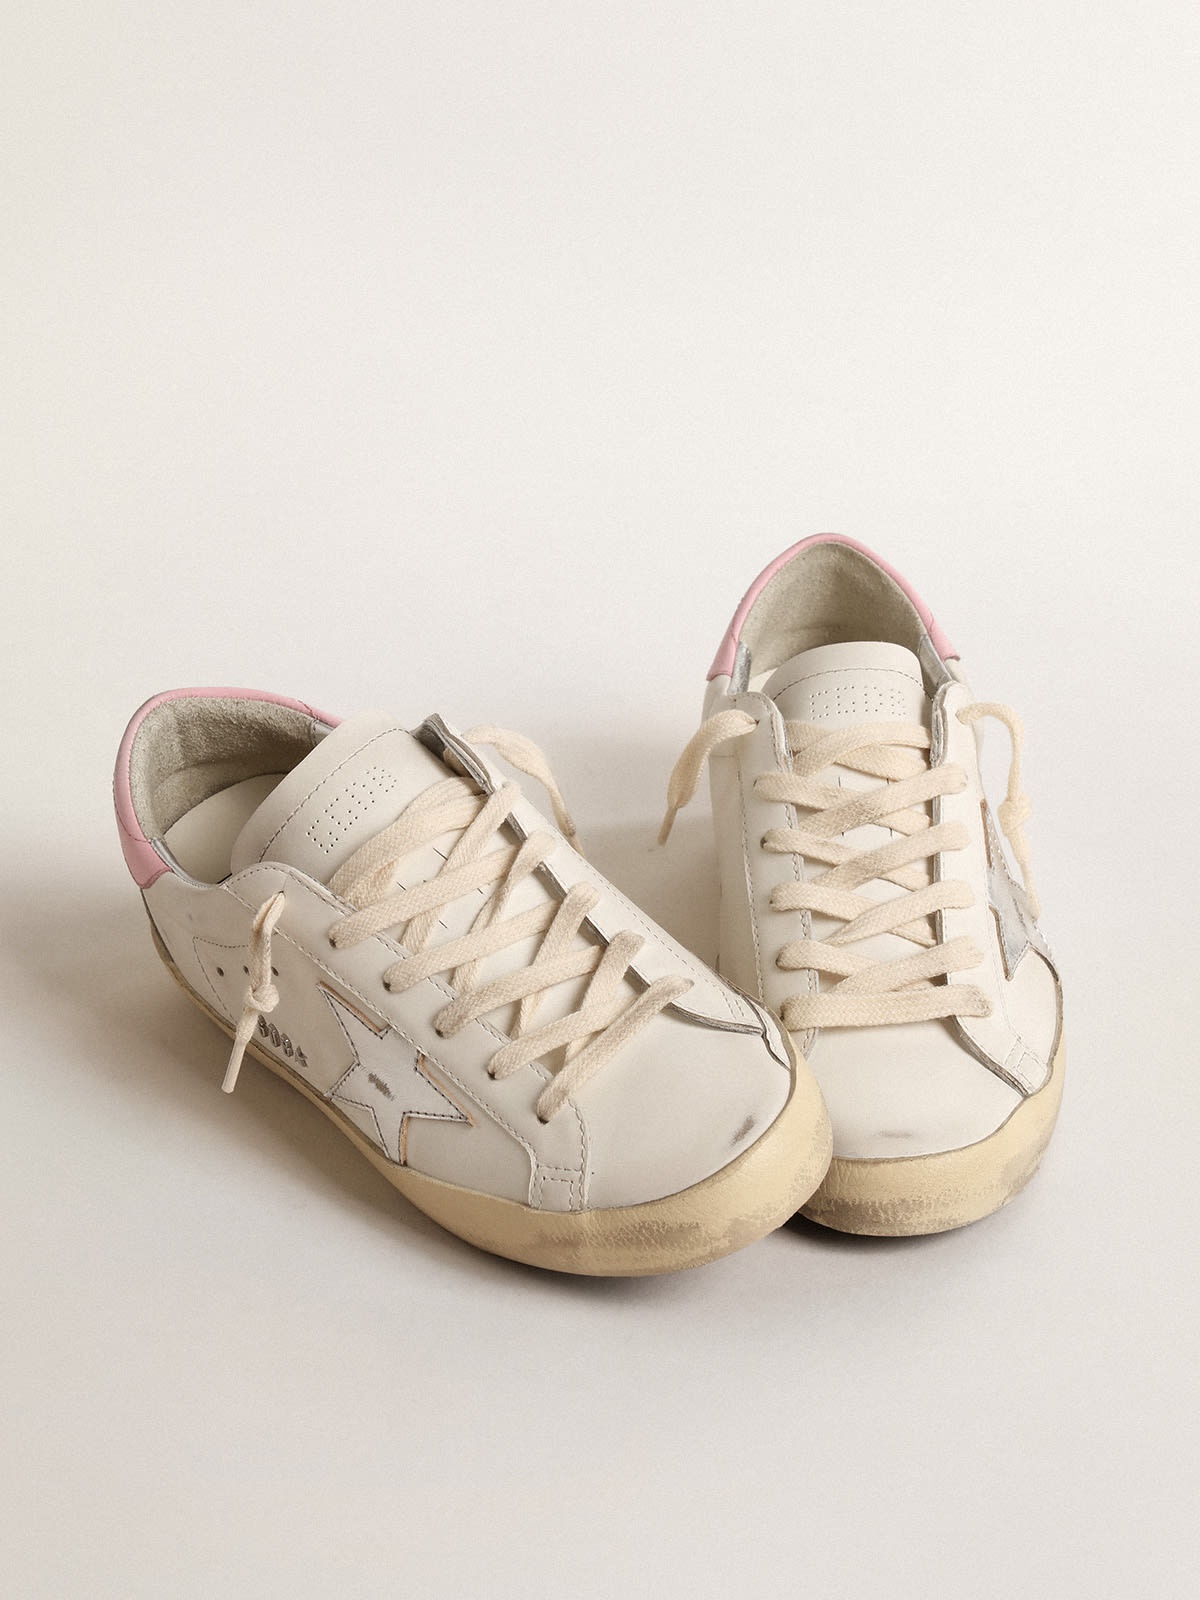 Super-Star LTD with silver leather star and pink heel tab - 2